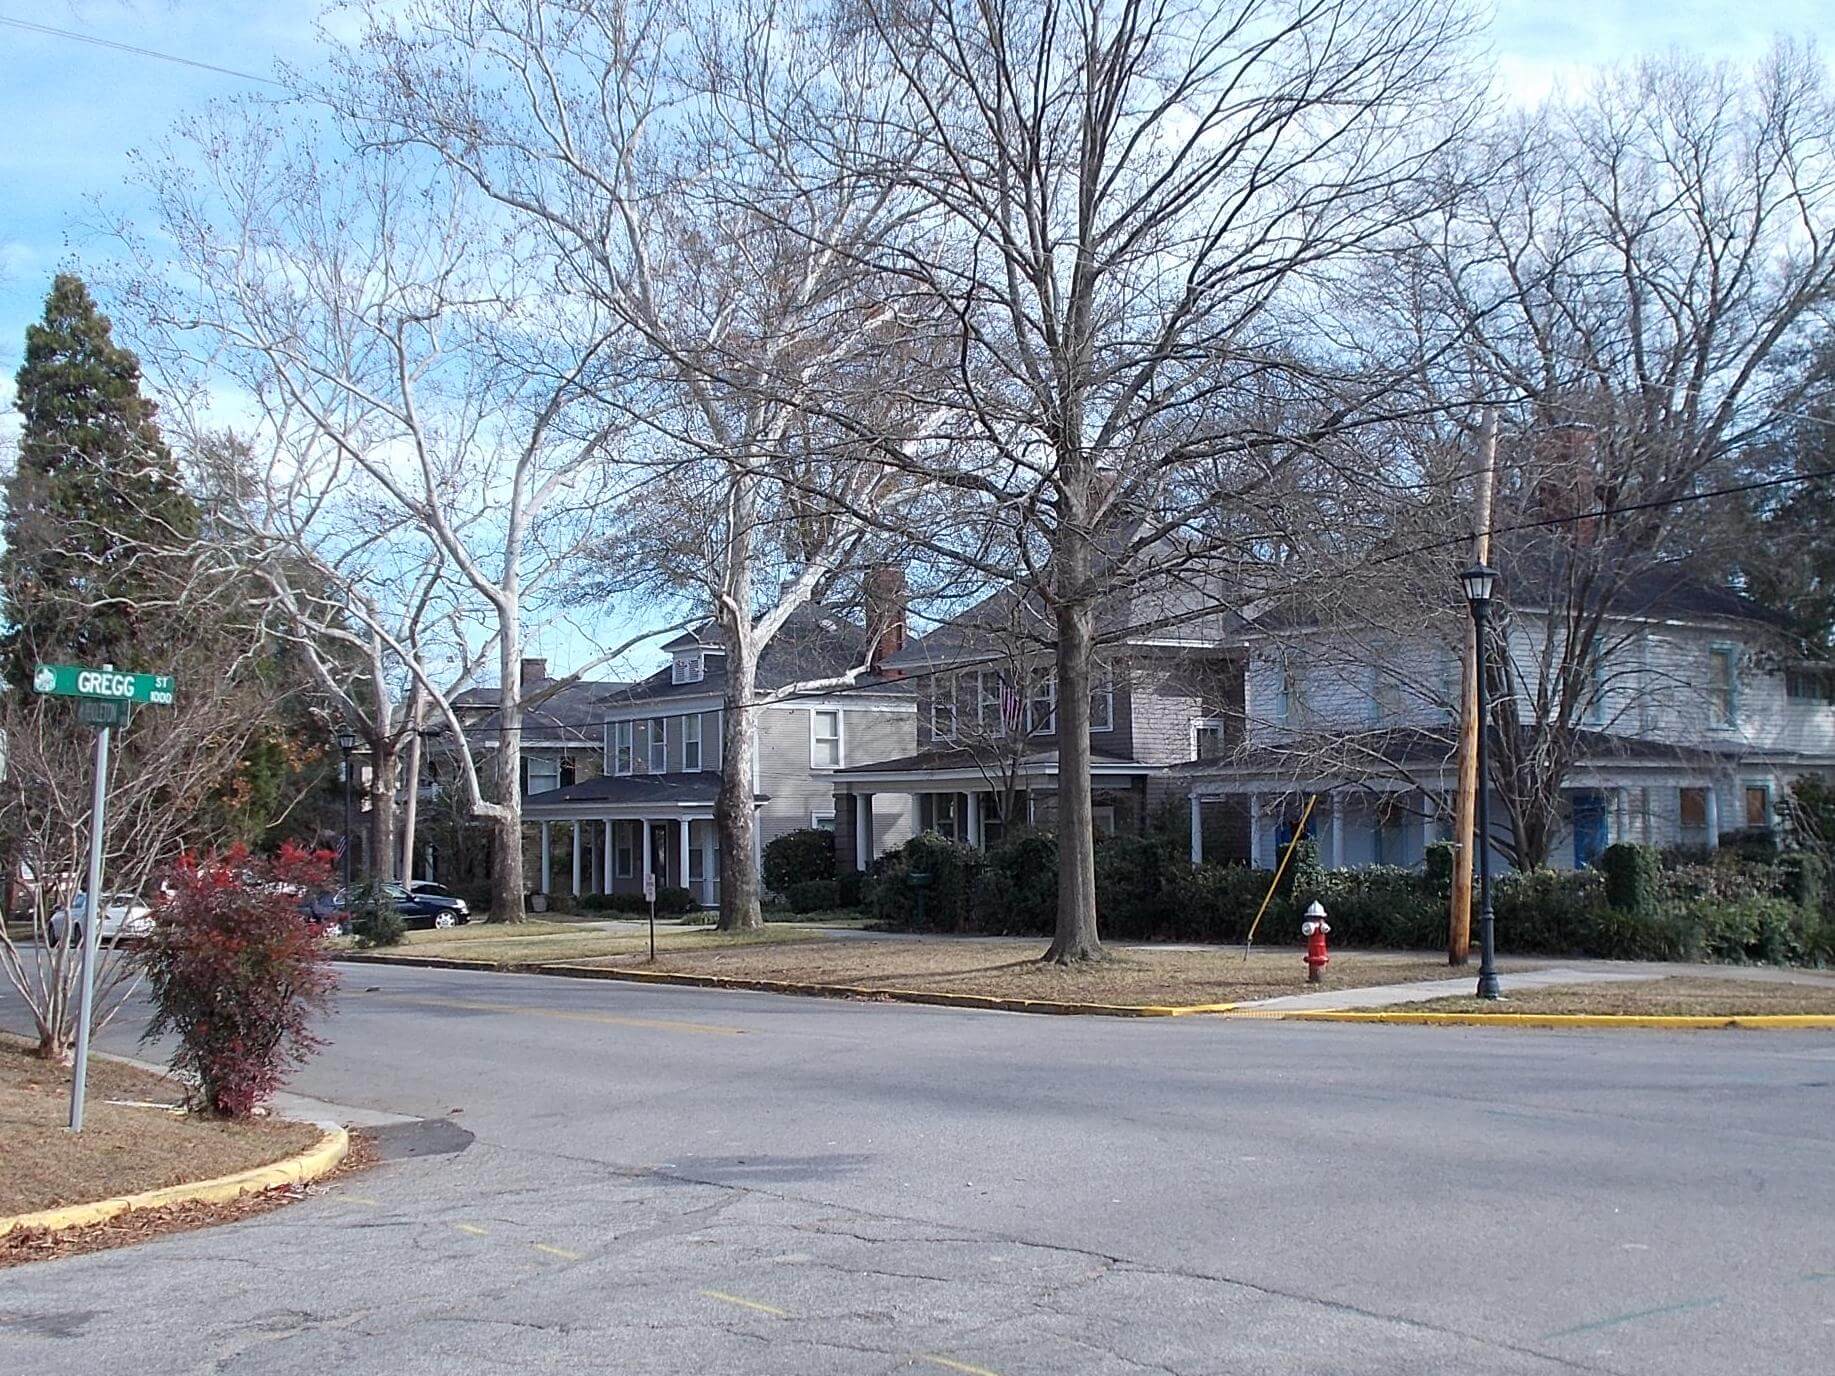 Photograph of a street corner with two story homes with porches